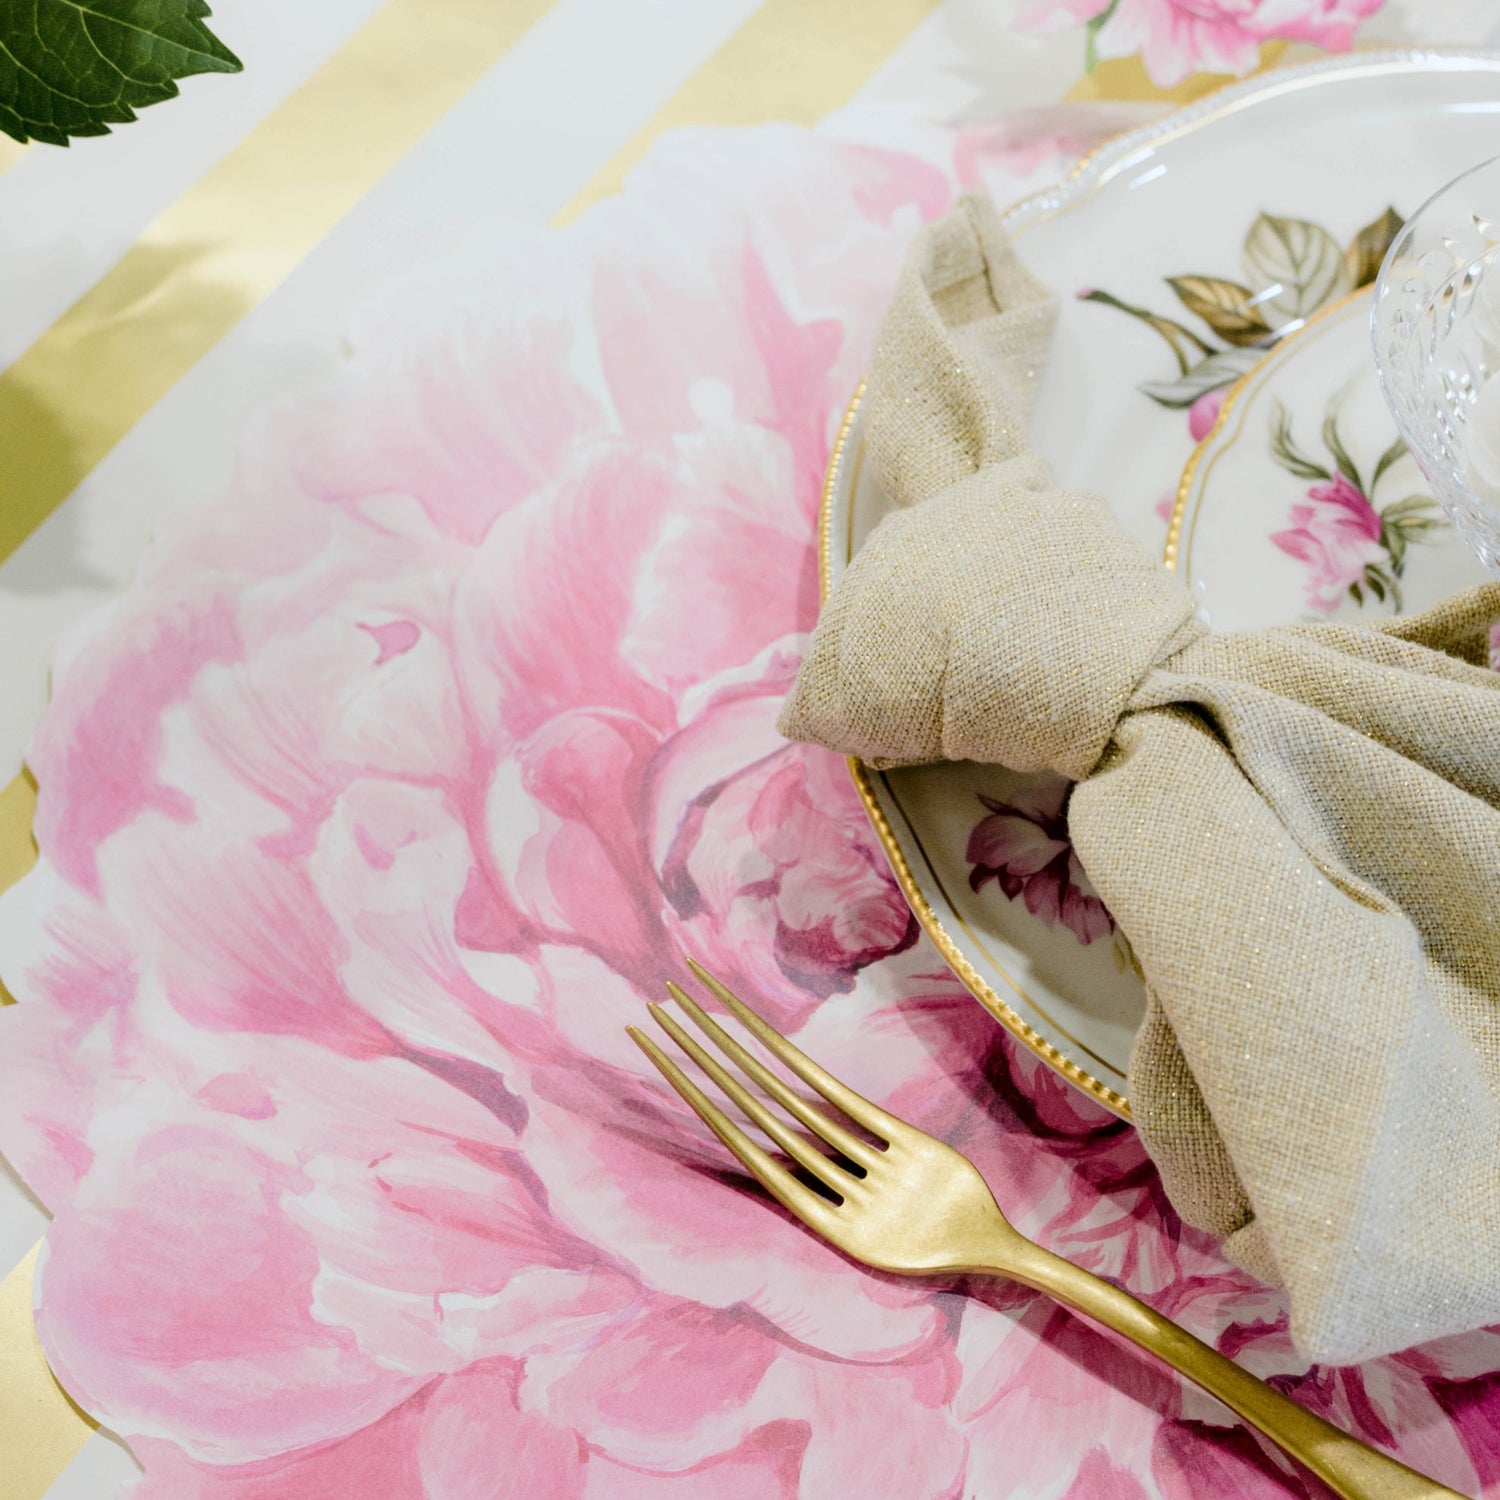 Close-up of the Die-cut Peony Placemat under an elegant floral place setting.